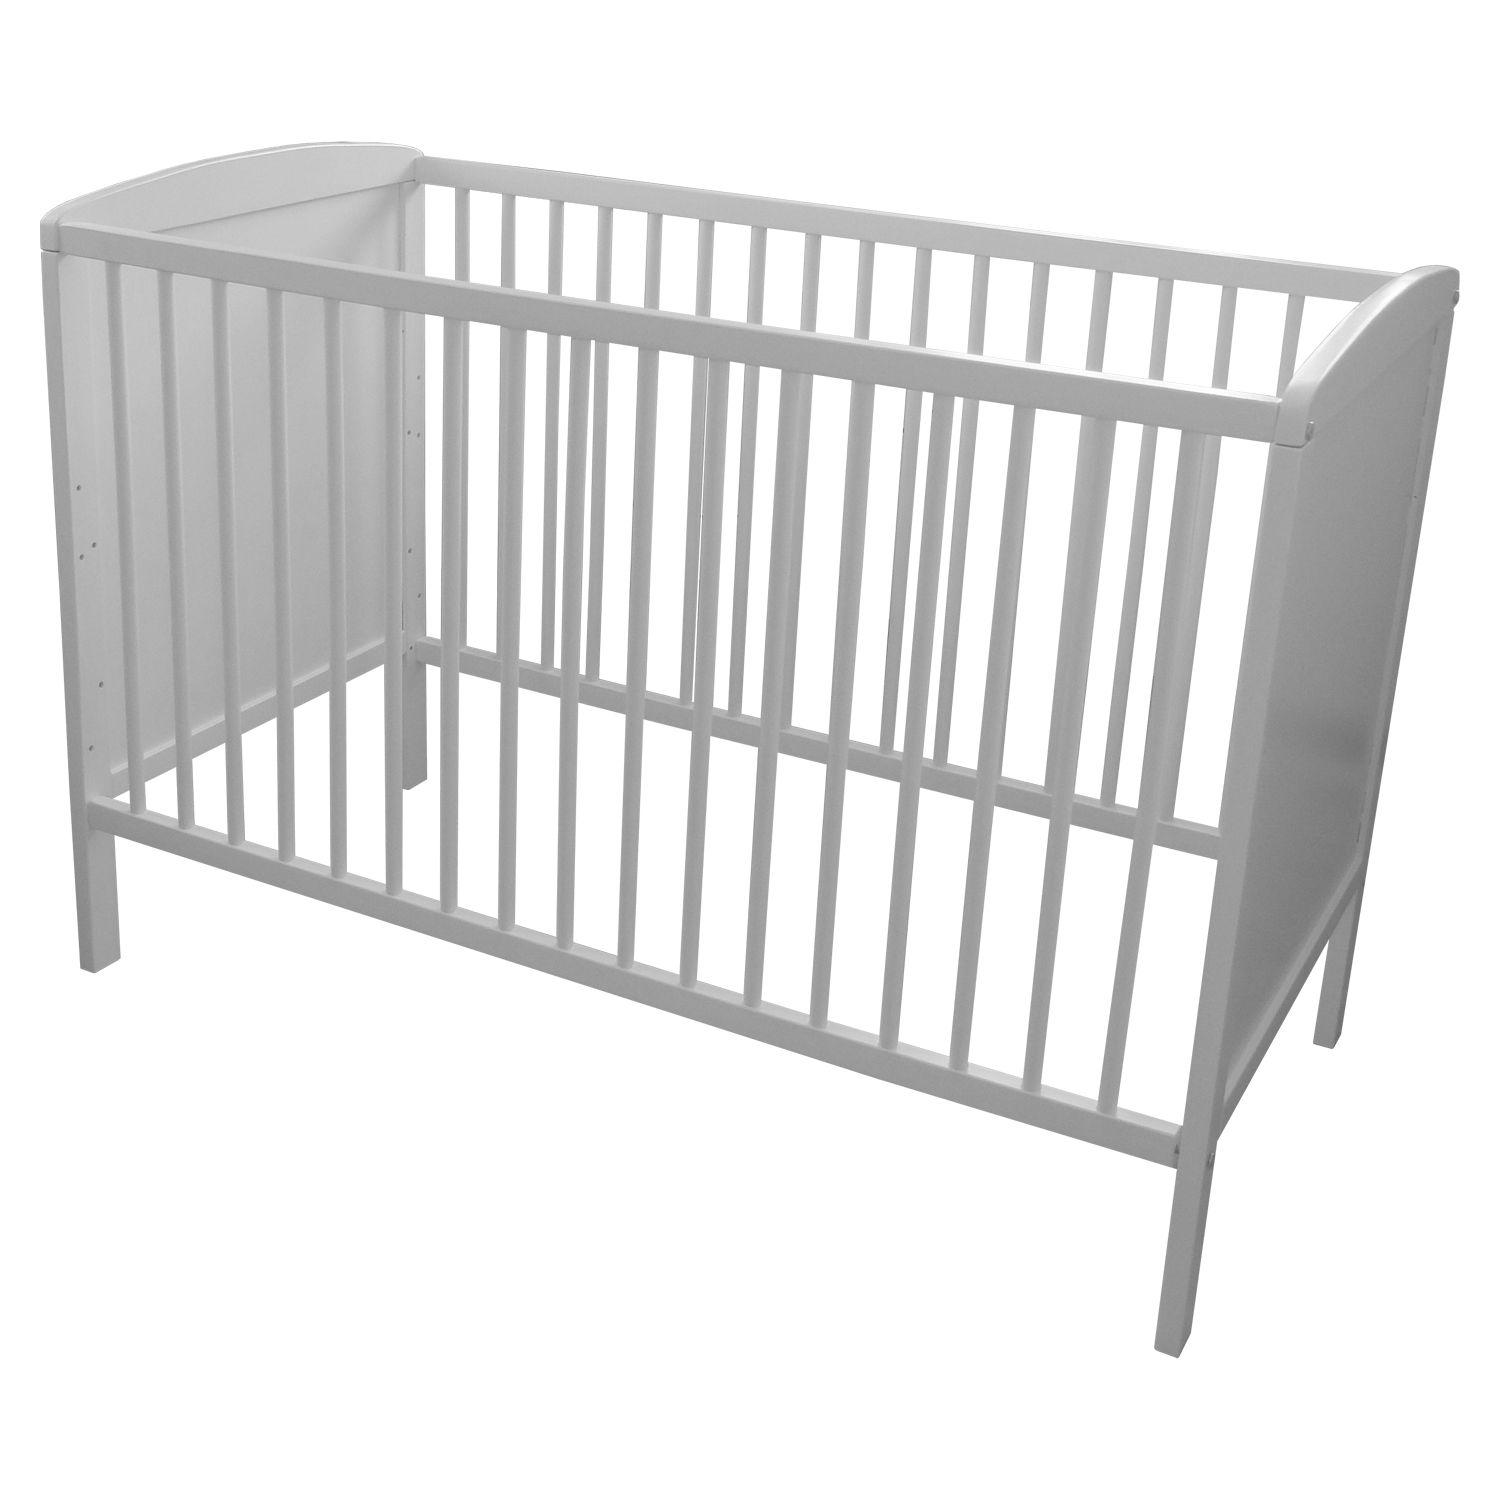 Wooden baby bed Lya 2 120x60